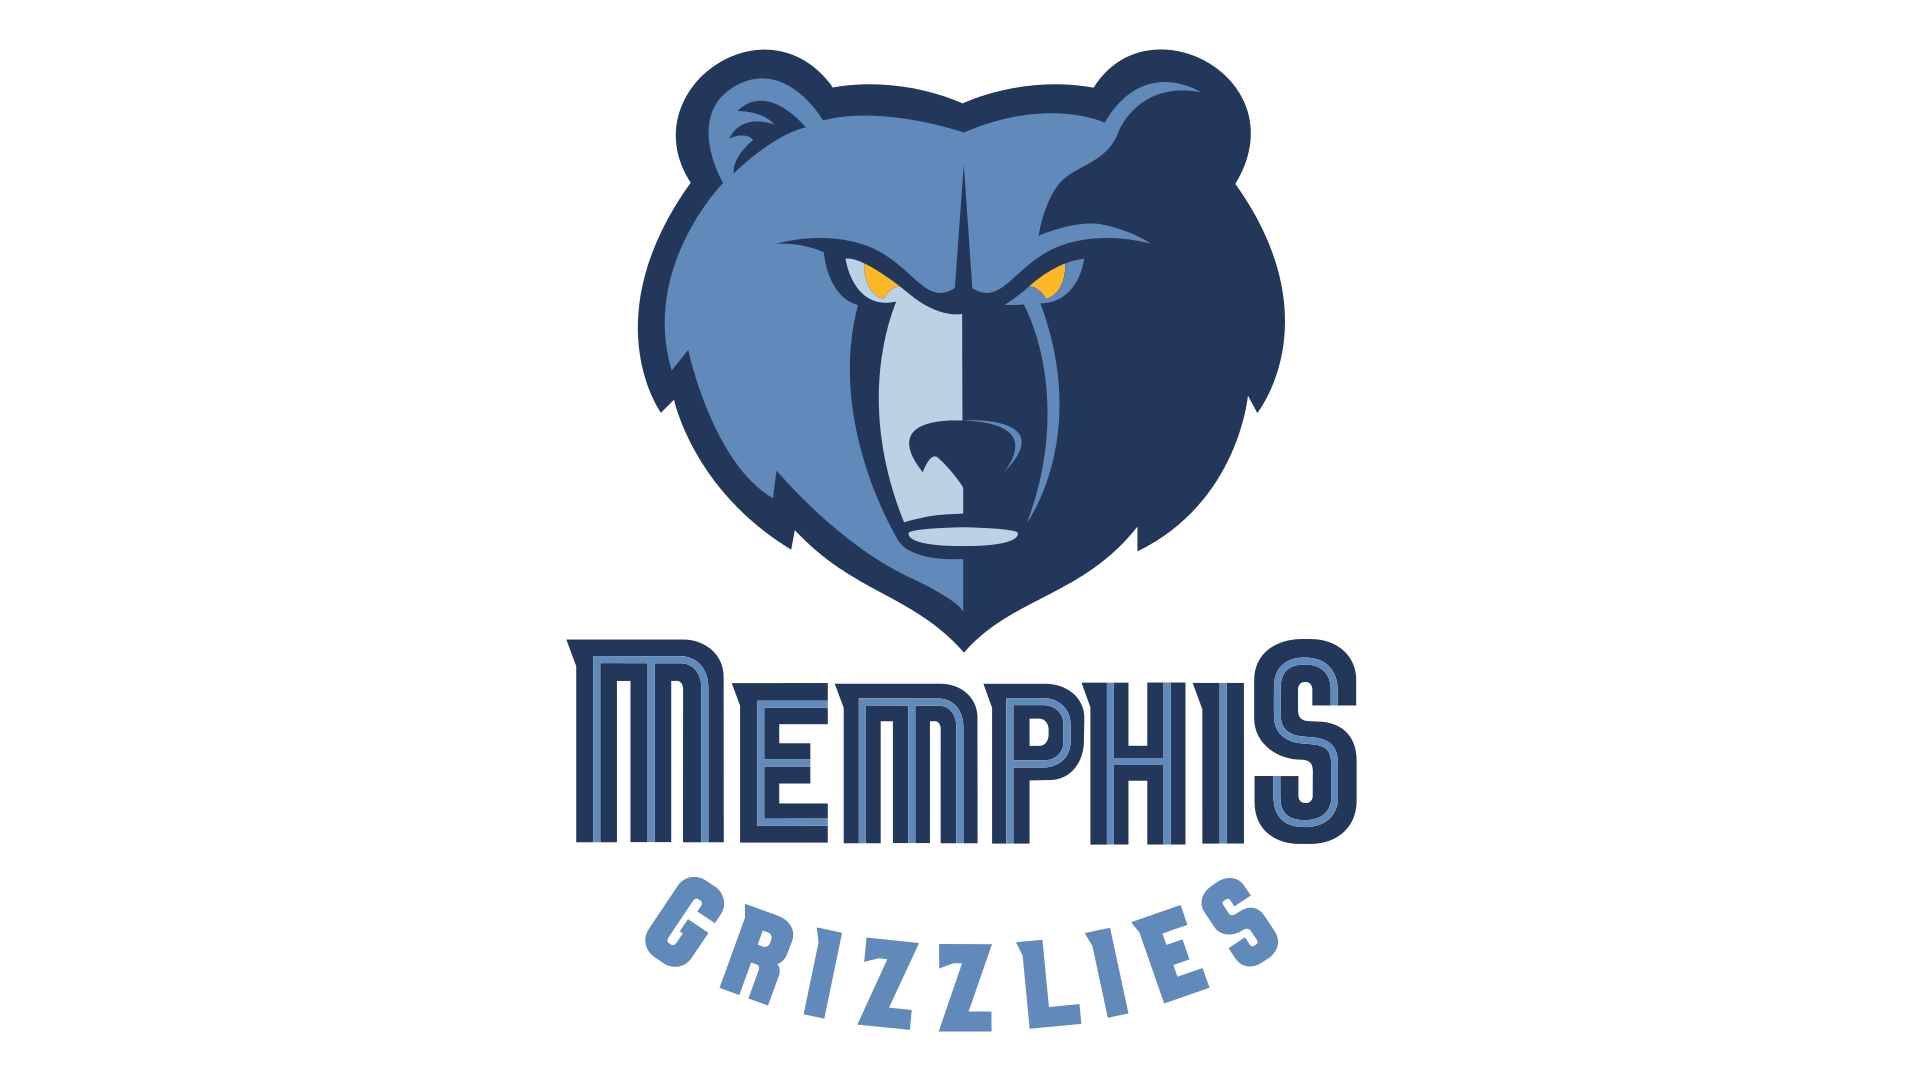 Grizzlies Logo - Memphis Grizzlies Logo, Memphis Grizzlies Symbol, Meaning, History ...